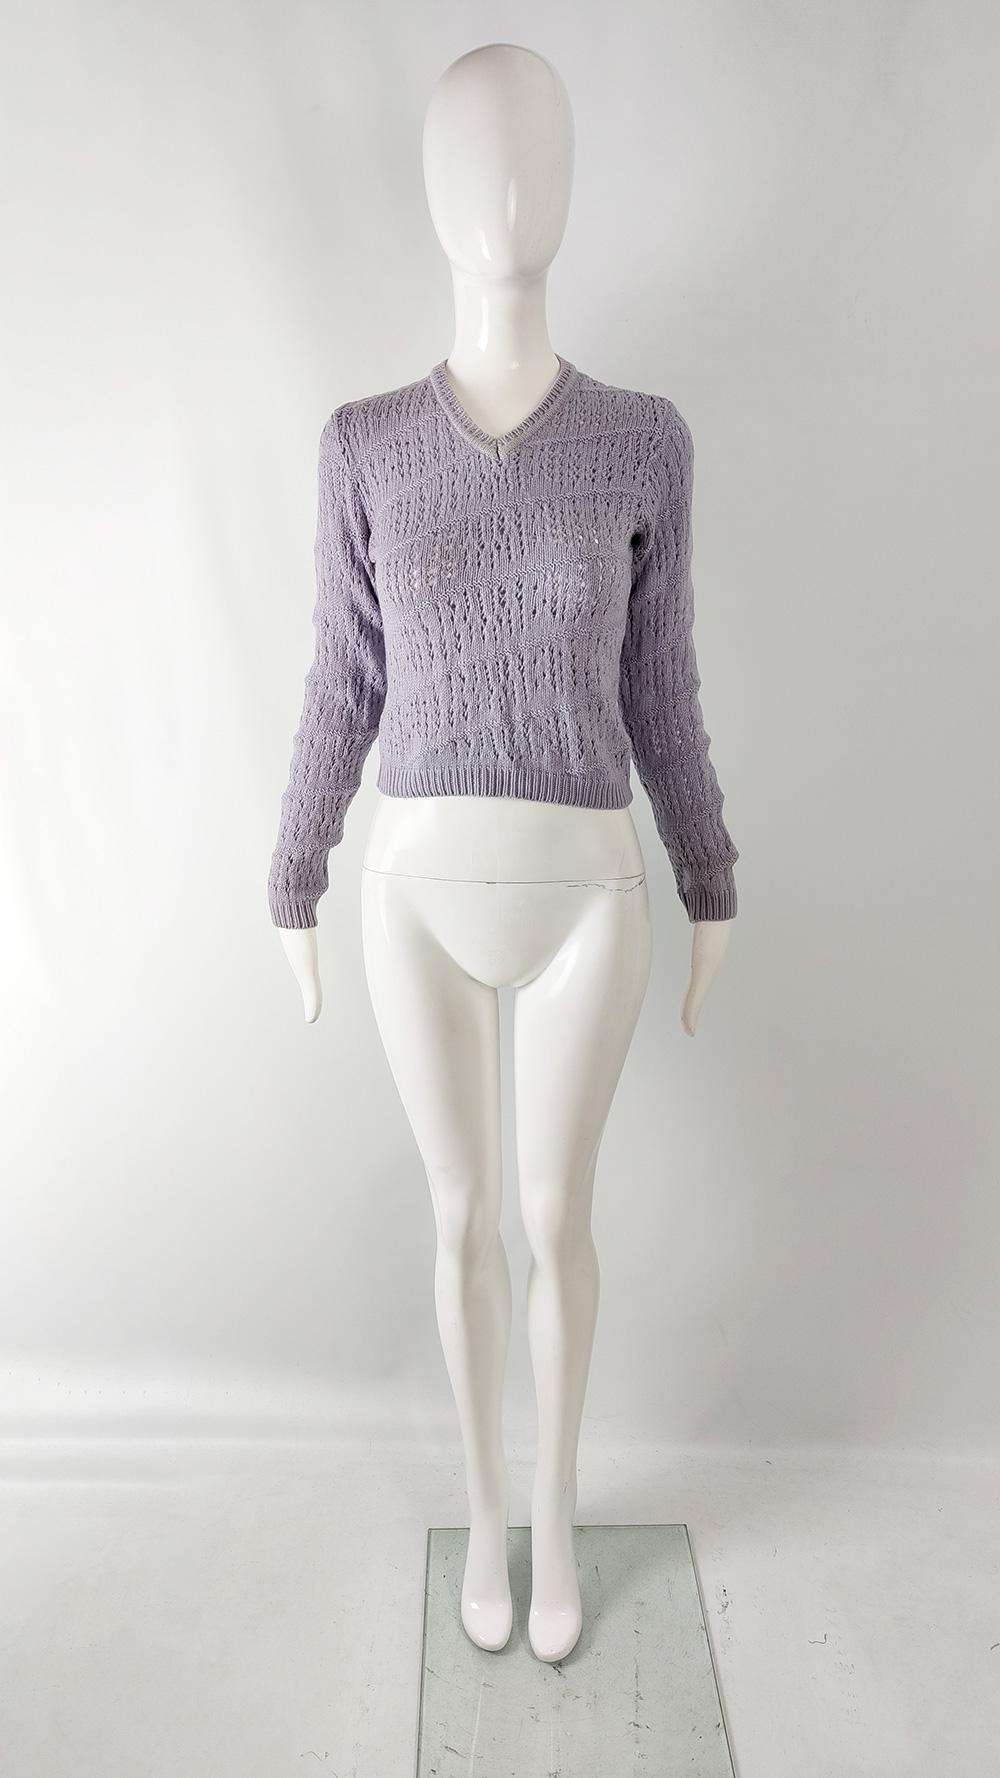  cute vintage womens sweater from the 90s by luxury Italian fashion designer, Gianni Versace for the Versus line. Made in Italy, from a lavender / pastel purple virgin wool fabric with incredible pointelle knit designs including a twisted design